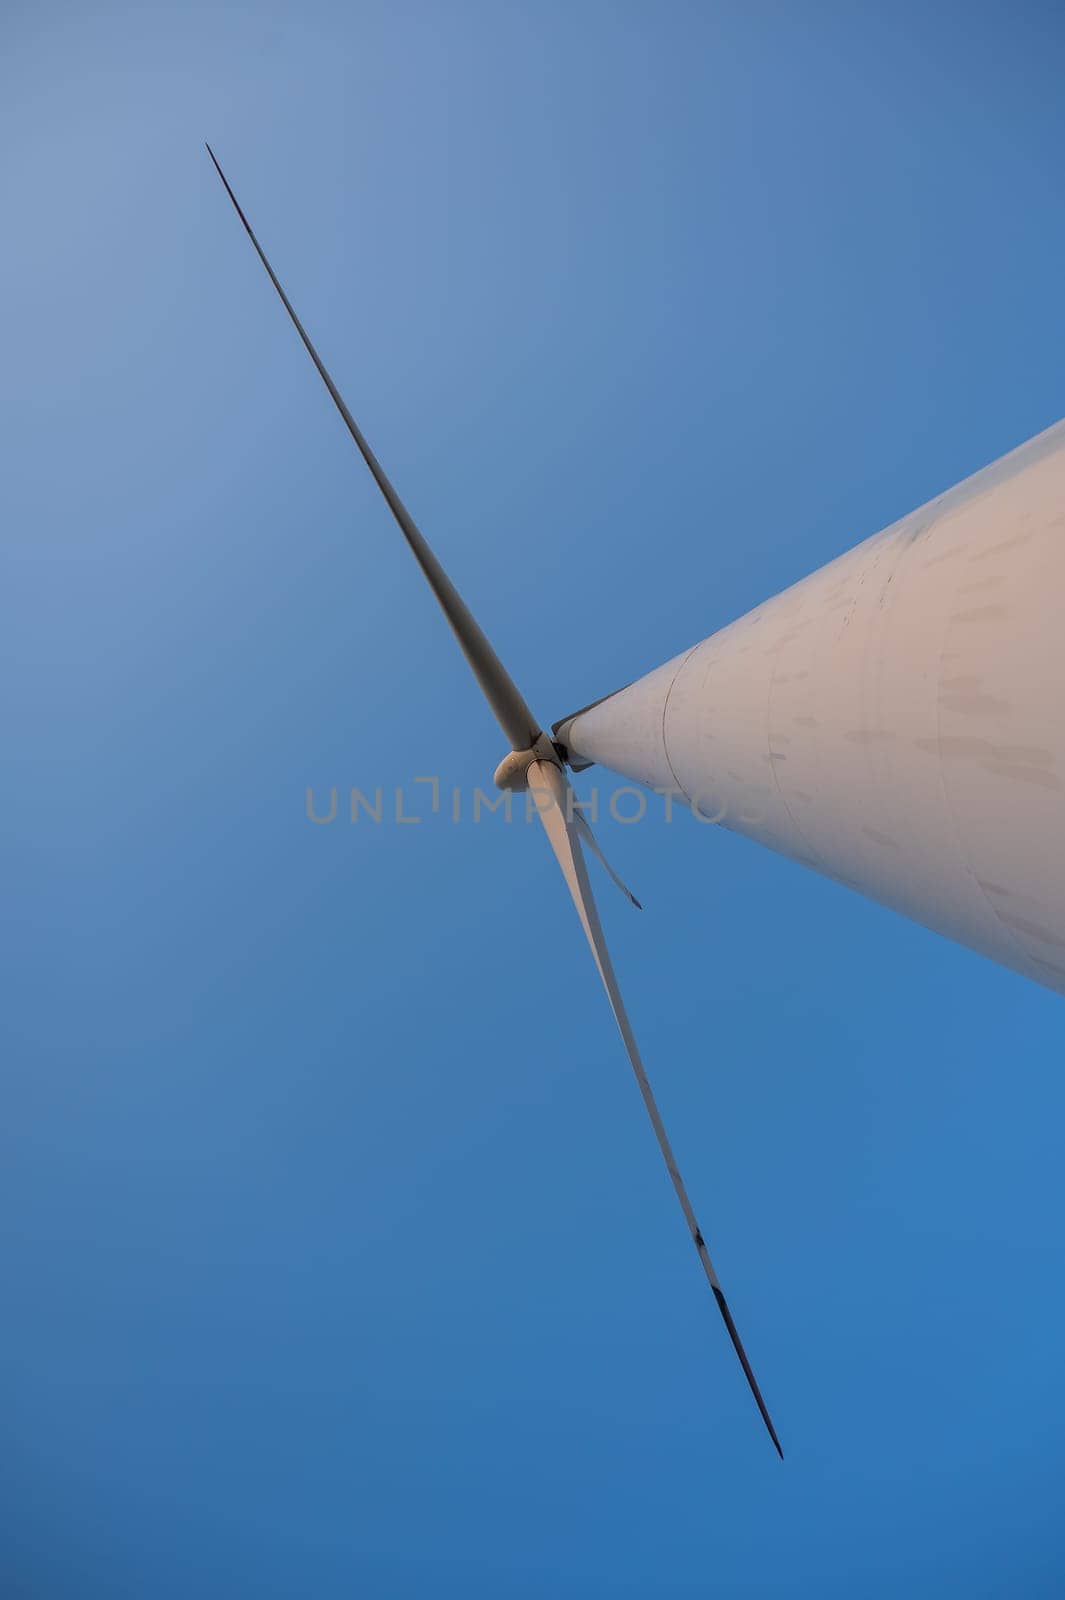 Bottom view of a windmill against a blue sky. Alternative energy source